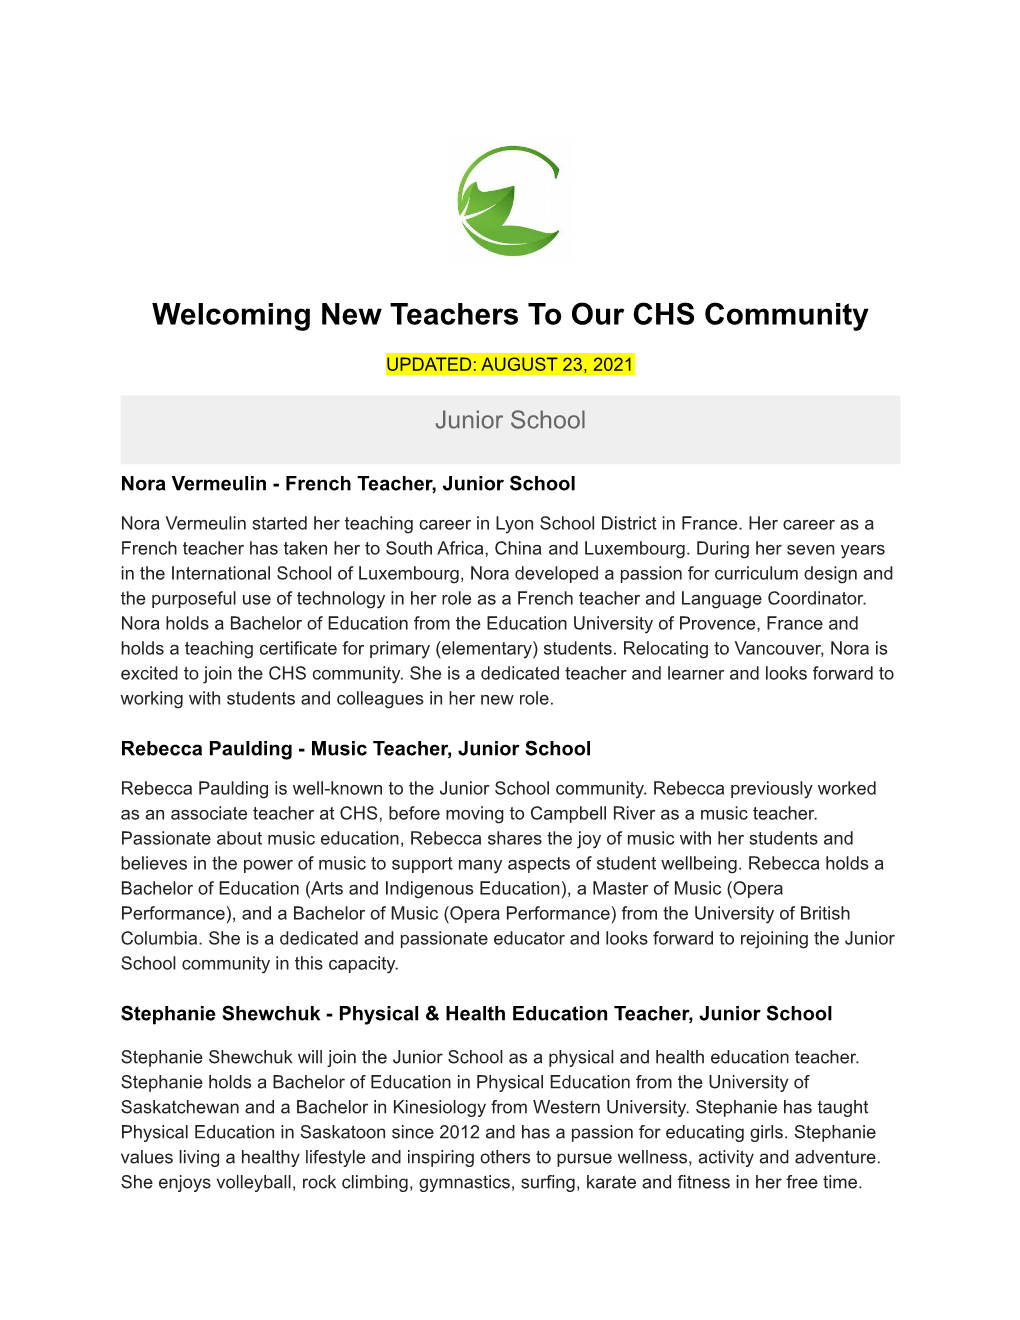 Welcoming New Teachers to Our CHS Community